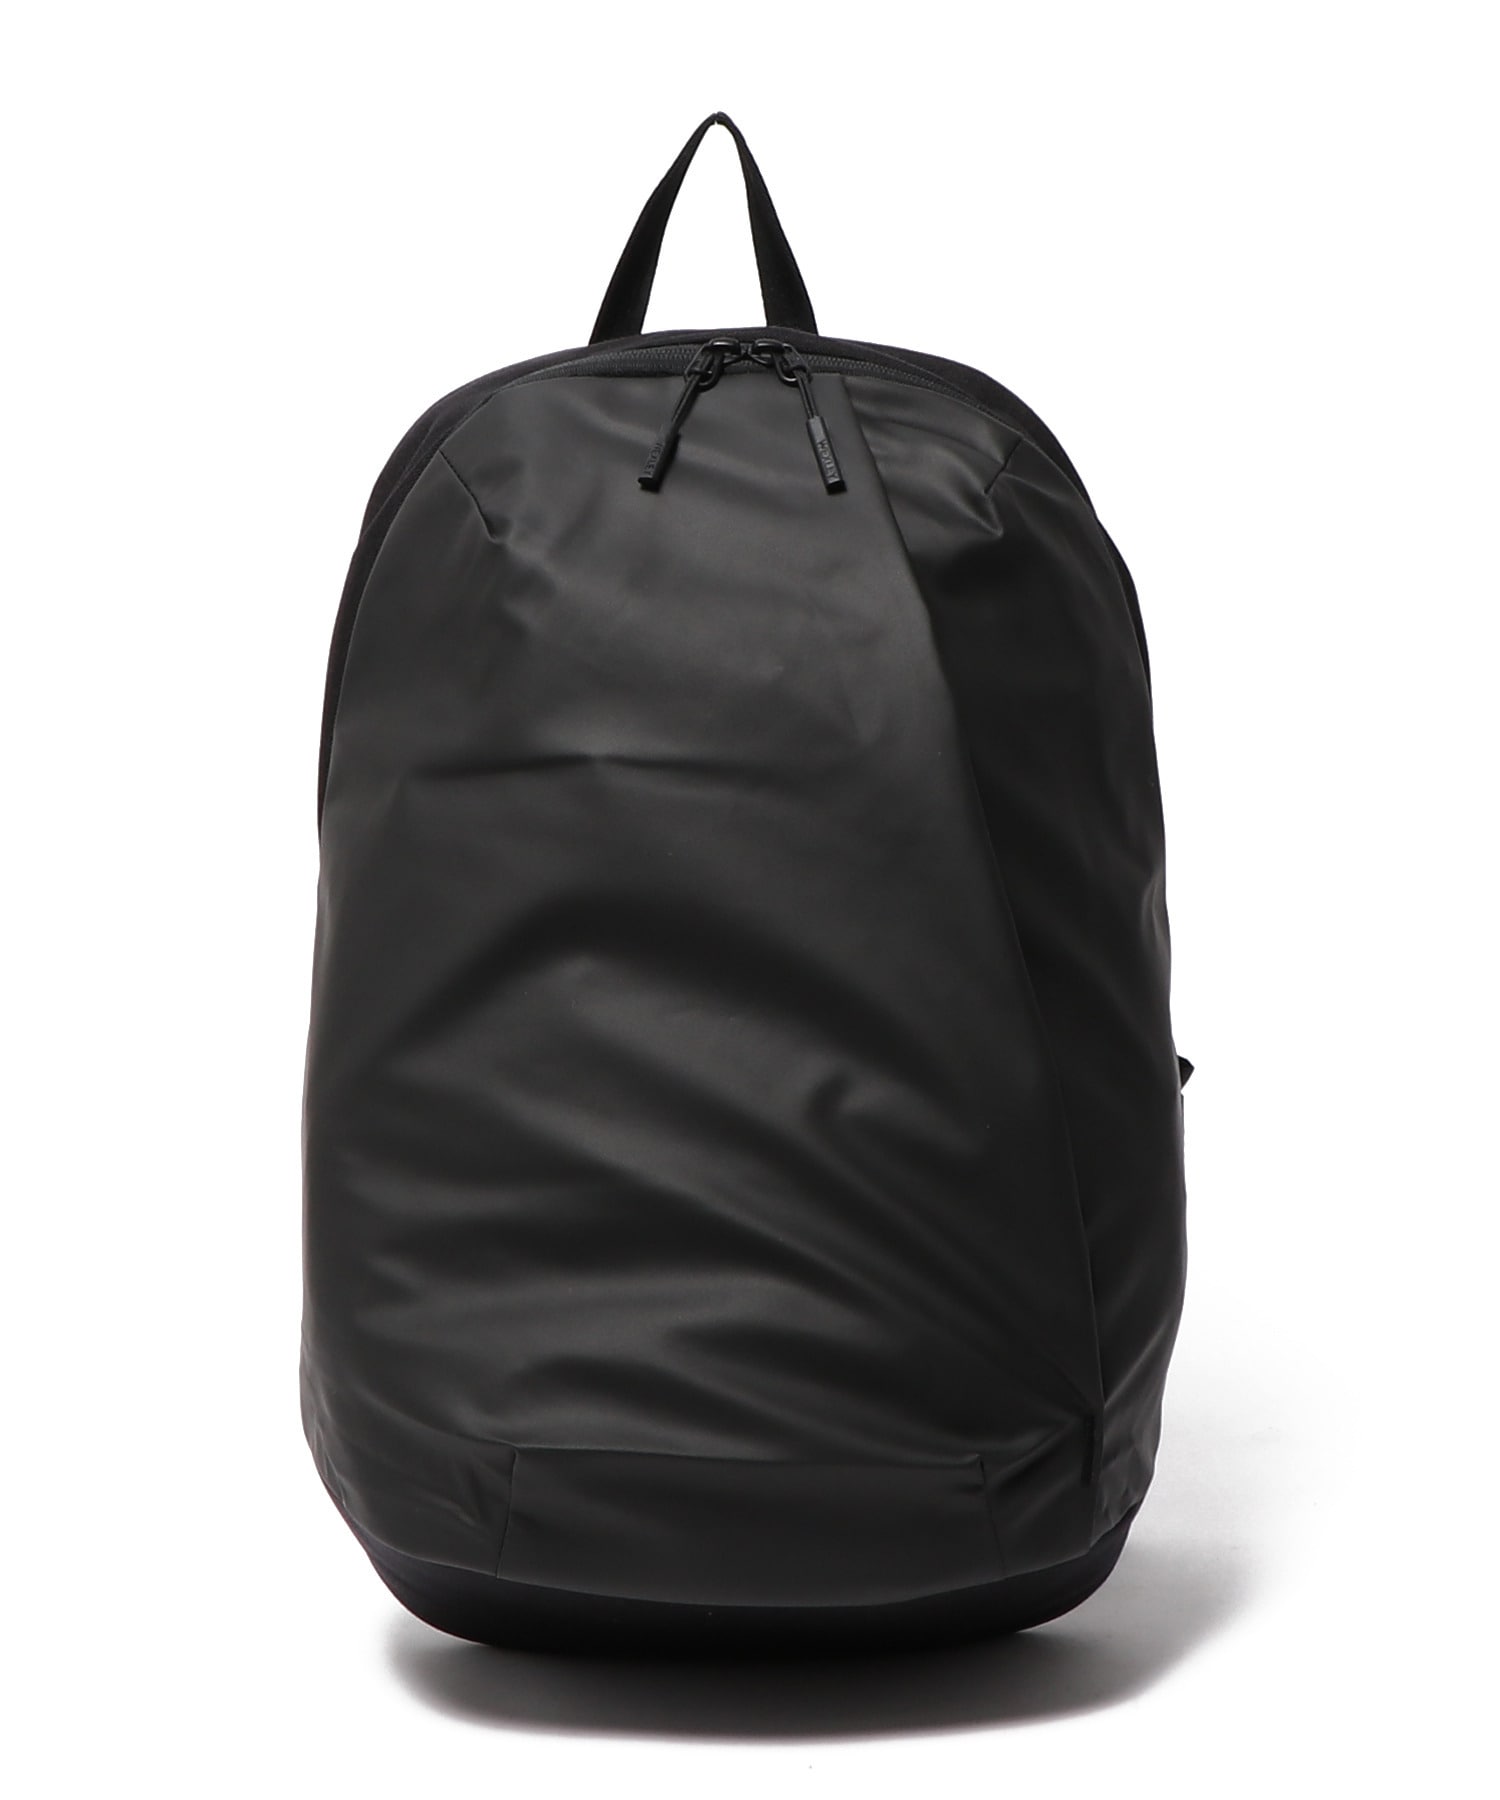 WEXLEY / "STEM BACKPACK CORDURA" バックパック